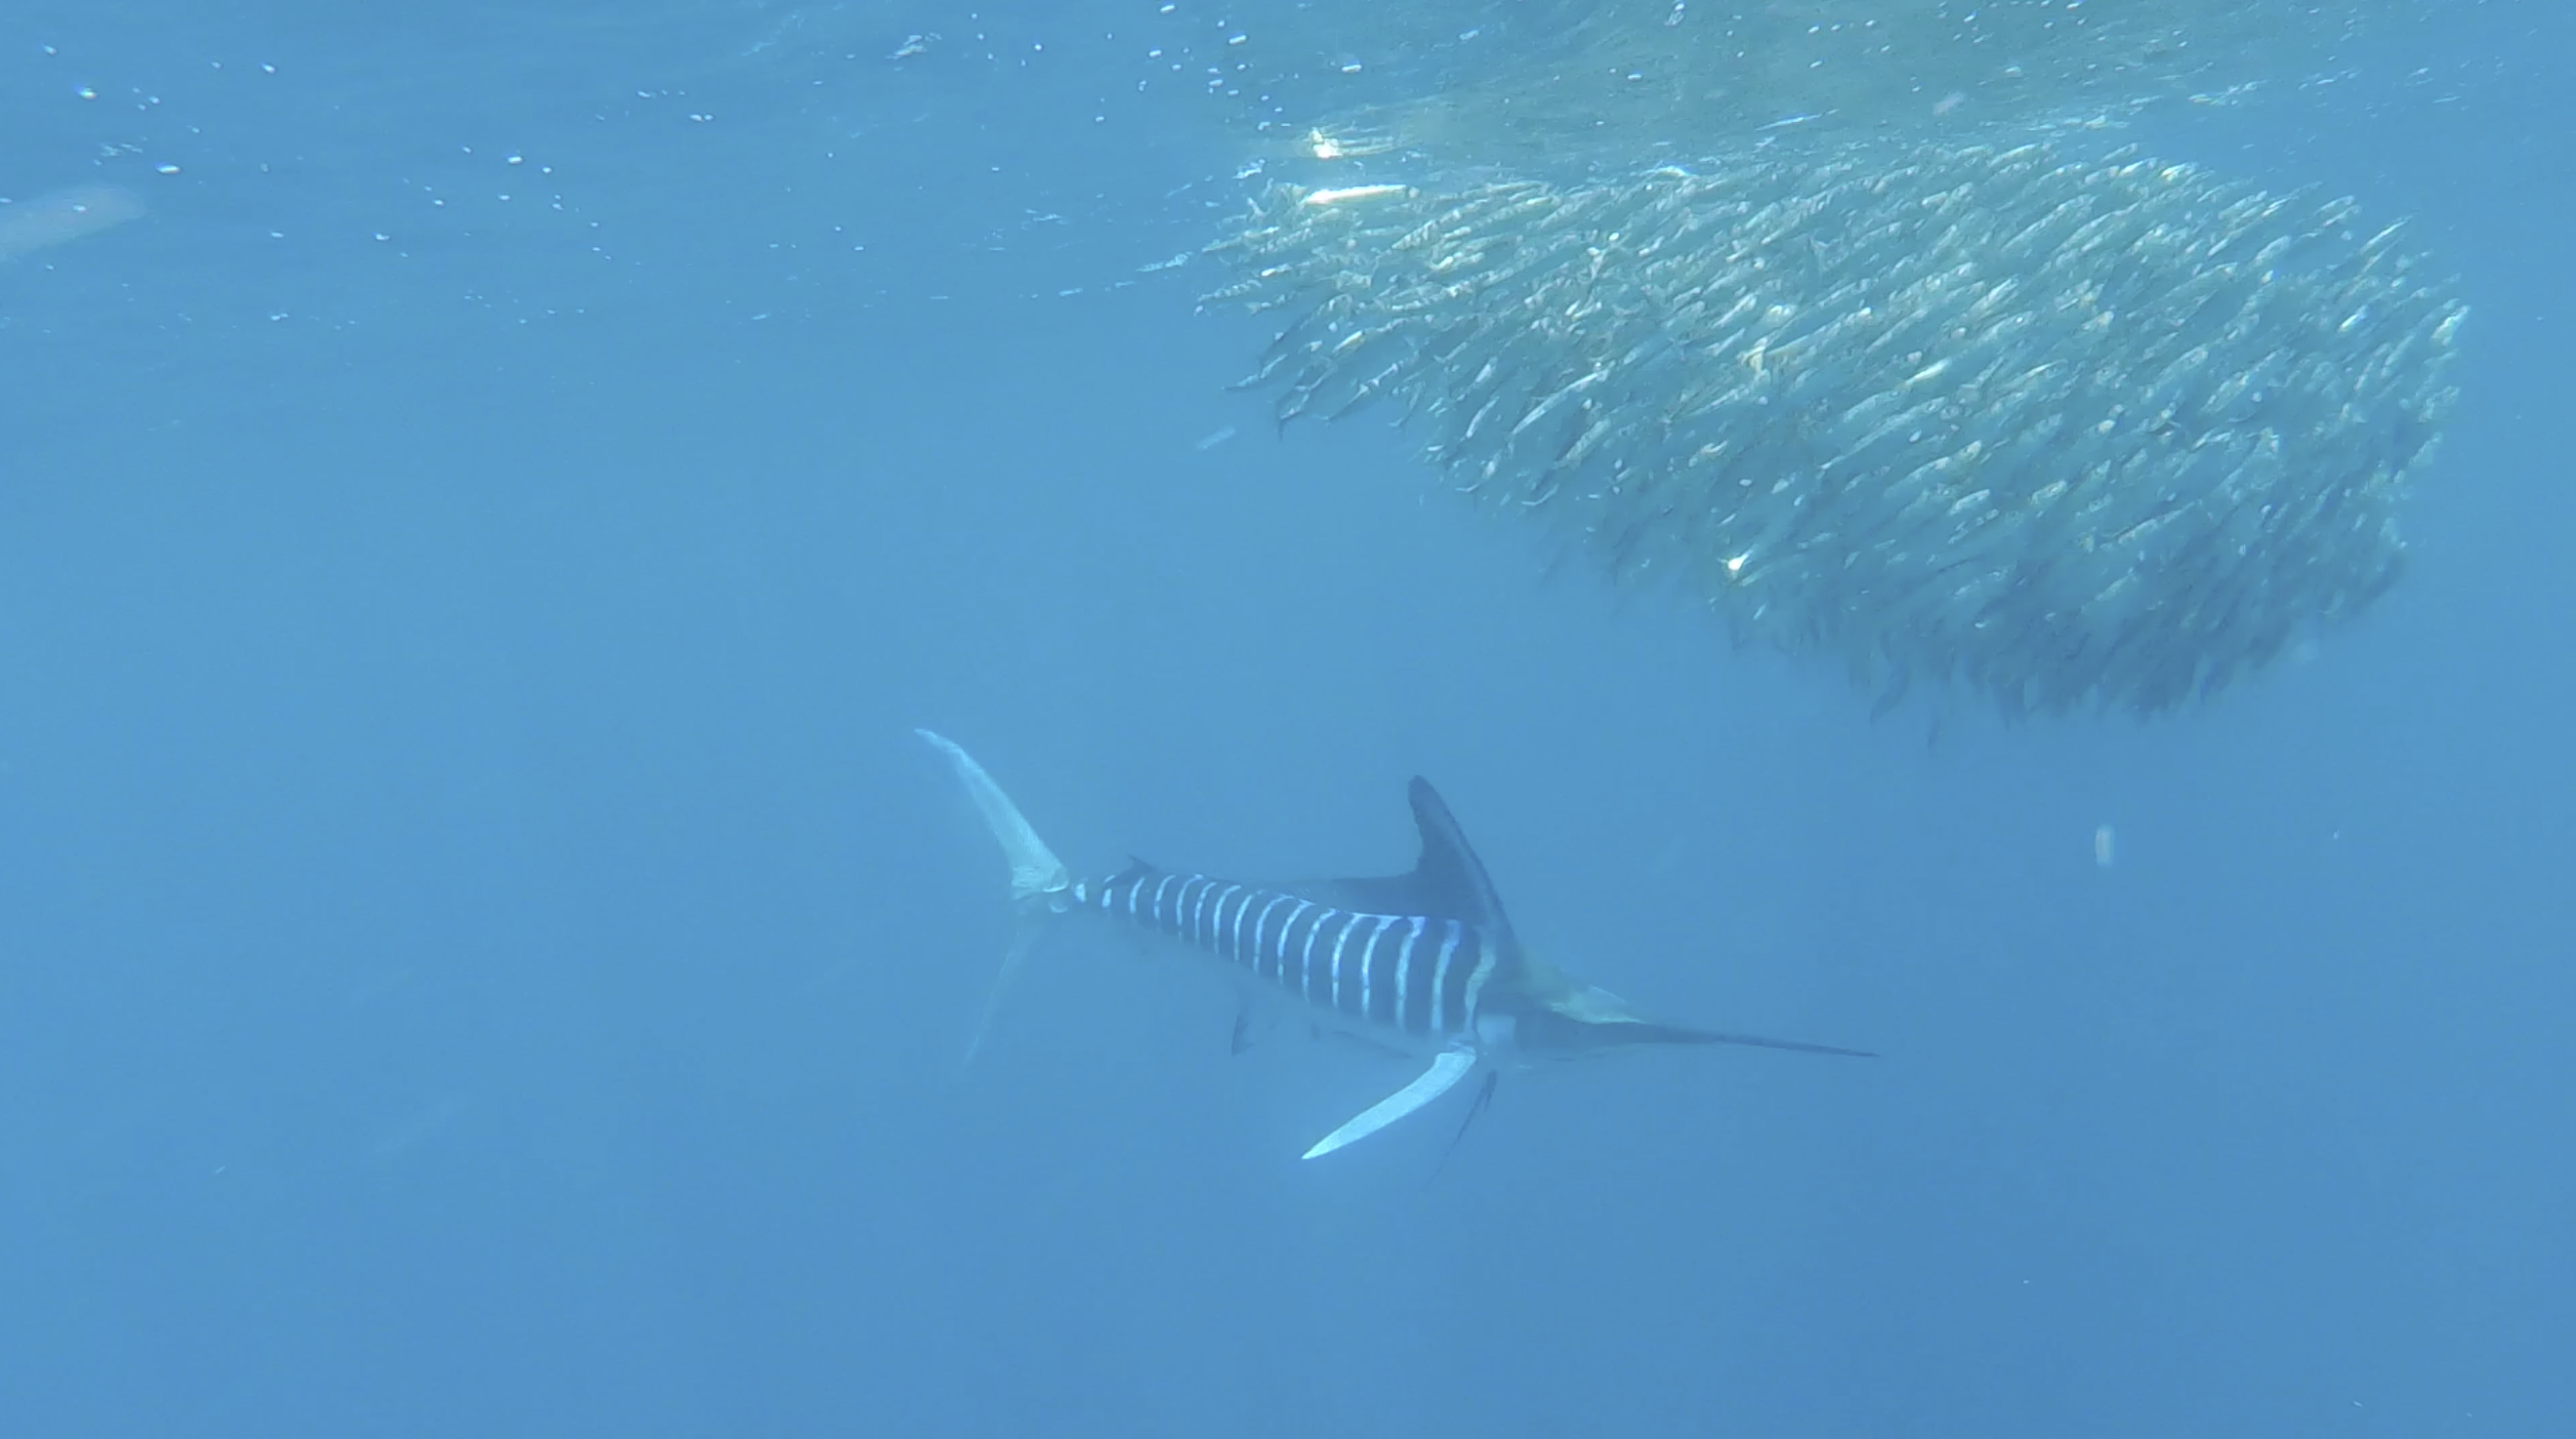 Striped Marlin coralling a school of sardines in the Galapagos Islands